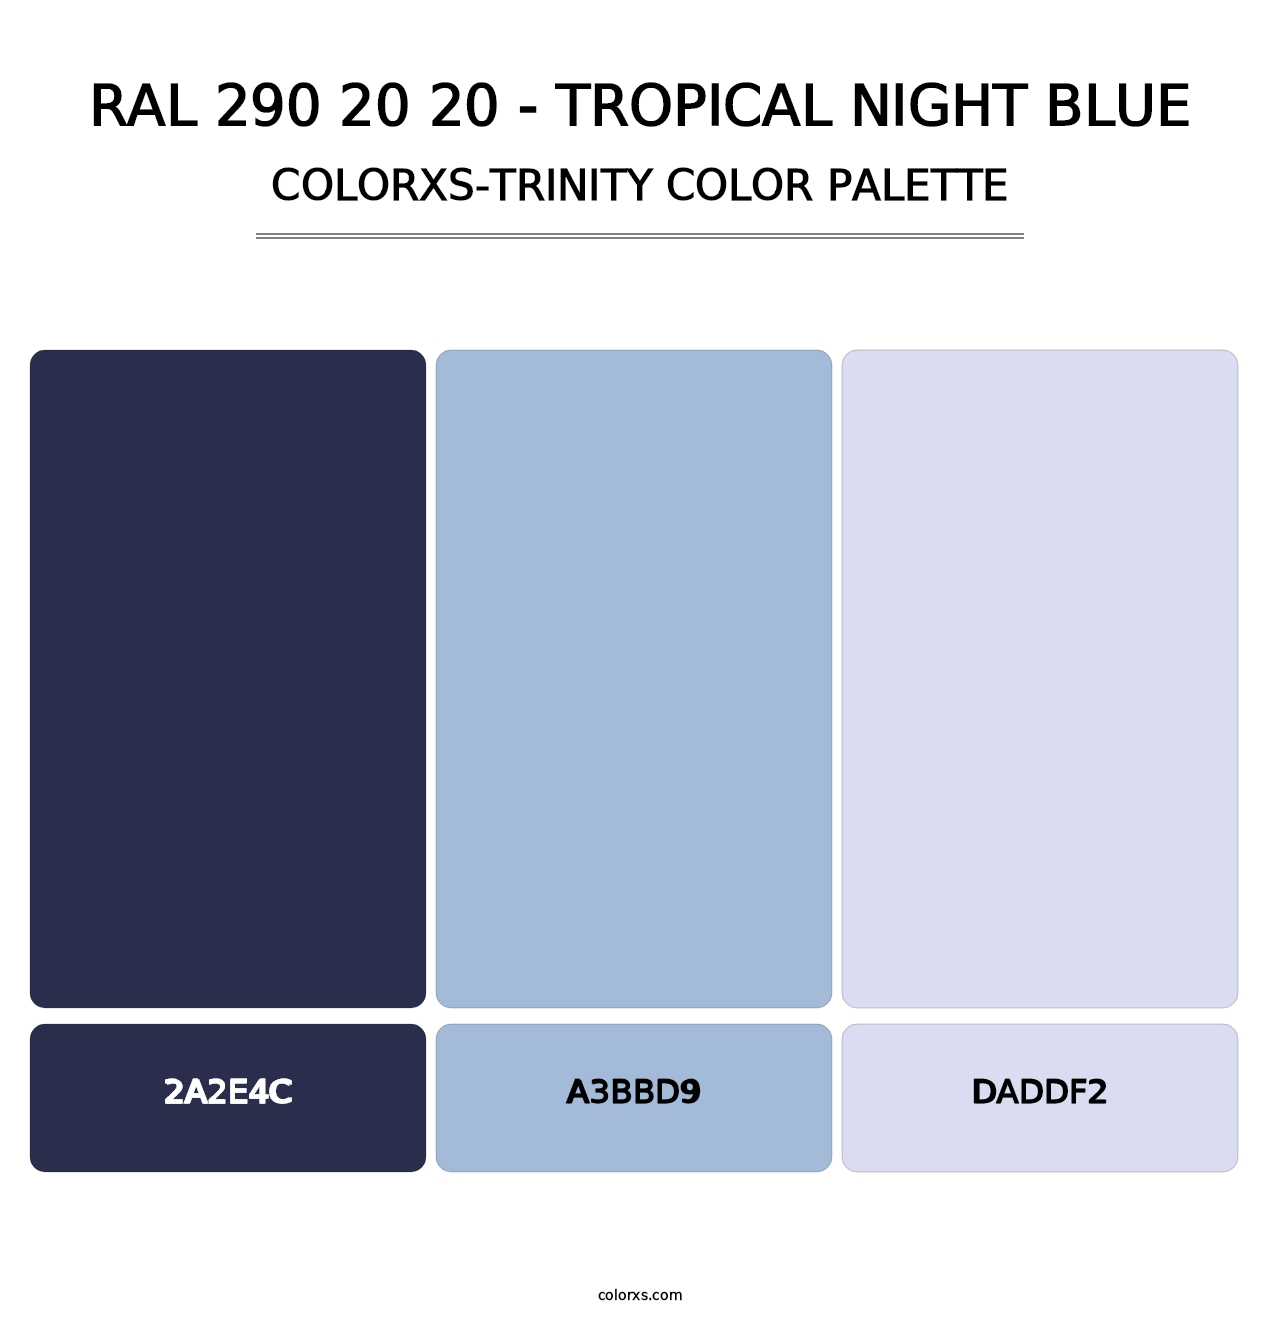 RAL 290 20 20 - Tropical Night Blue - Colorxs Trinity Palette